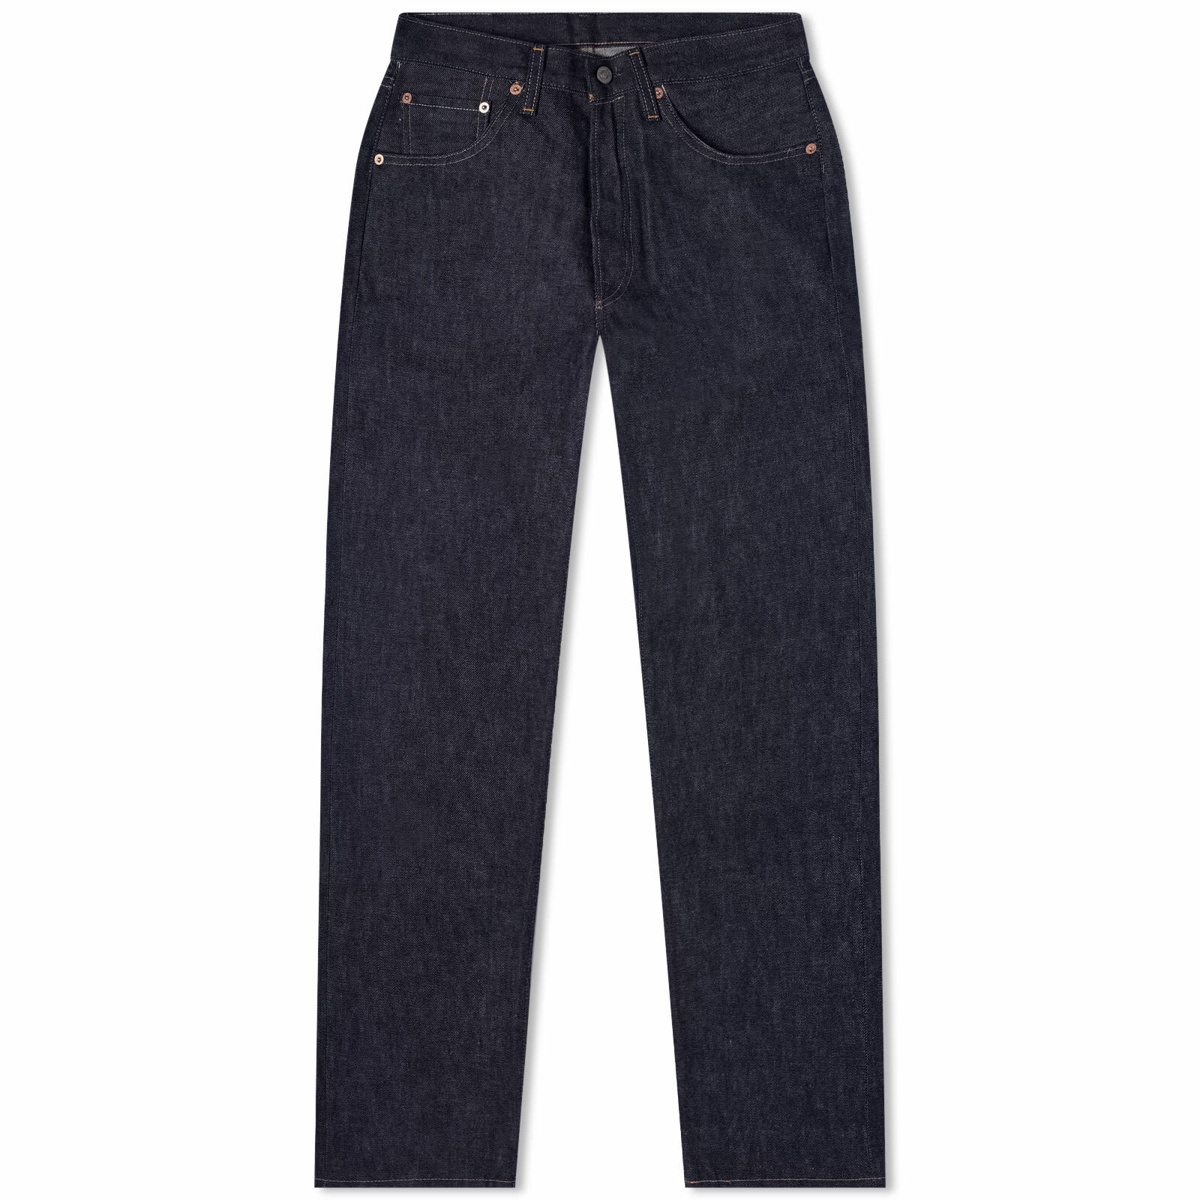 Photo: Levi’s Collections Men's 1955 Hand Drawn Jeans in Indigo Rinse